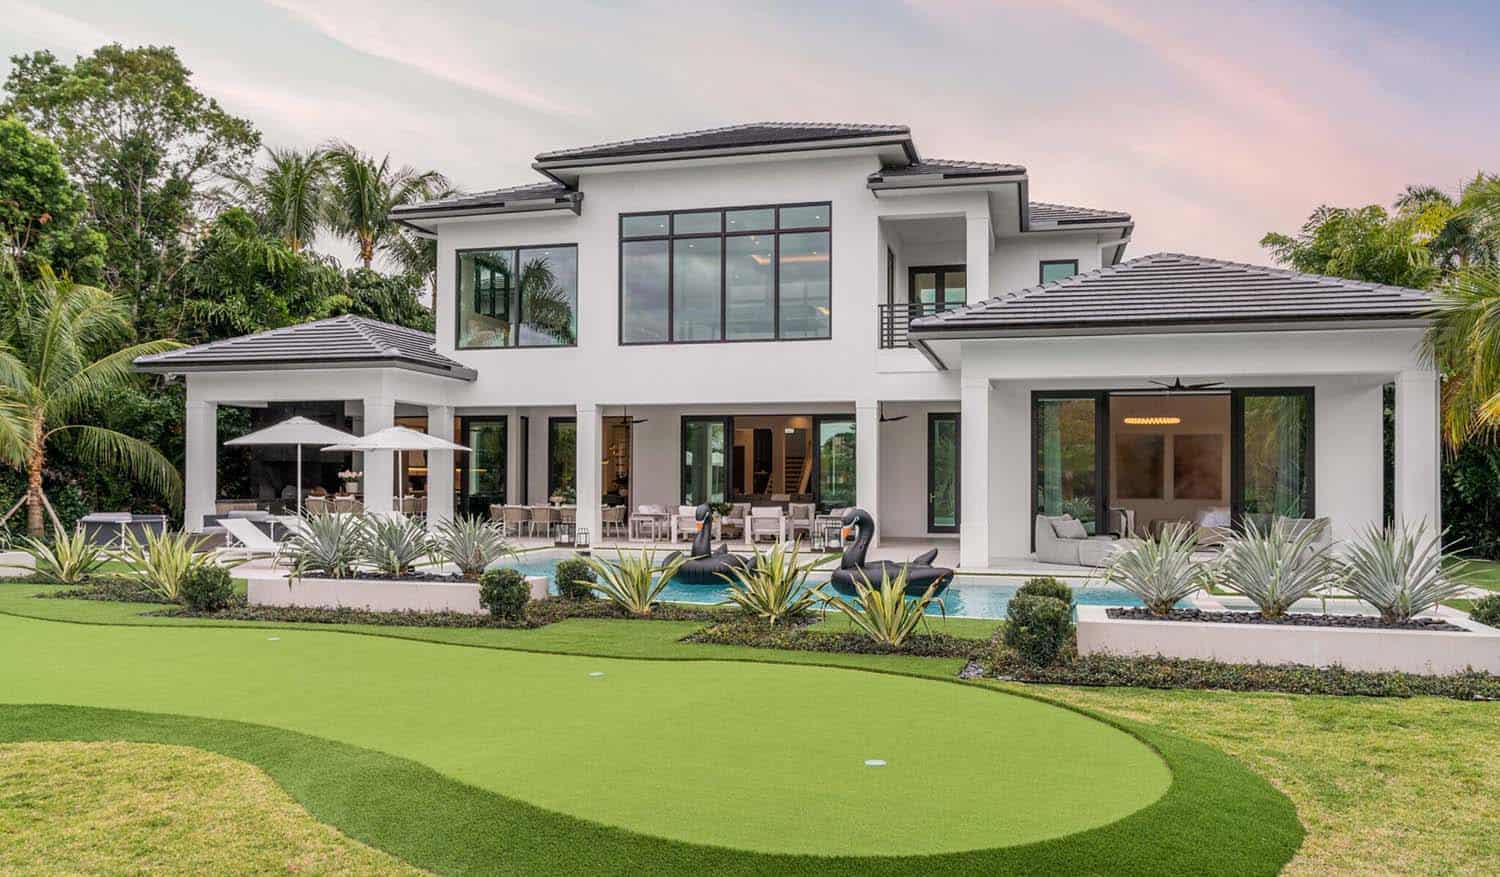 California modern style home exterior with a putting green